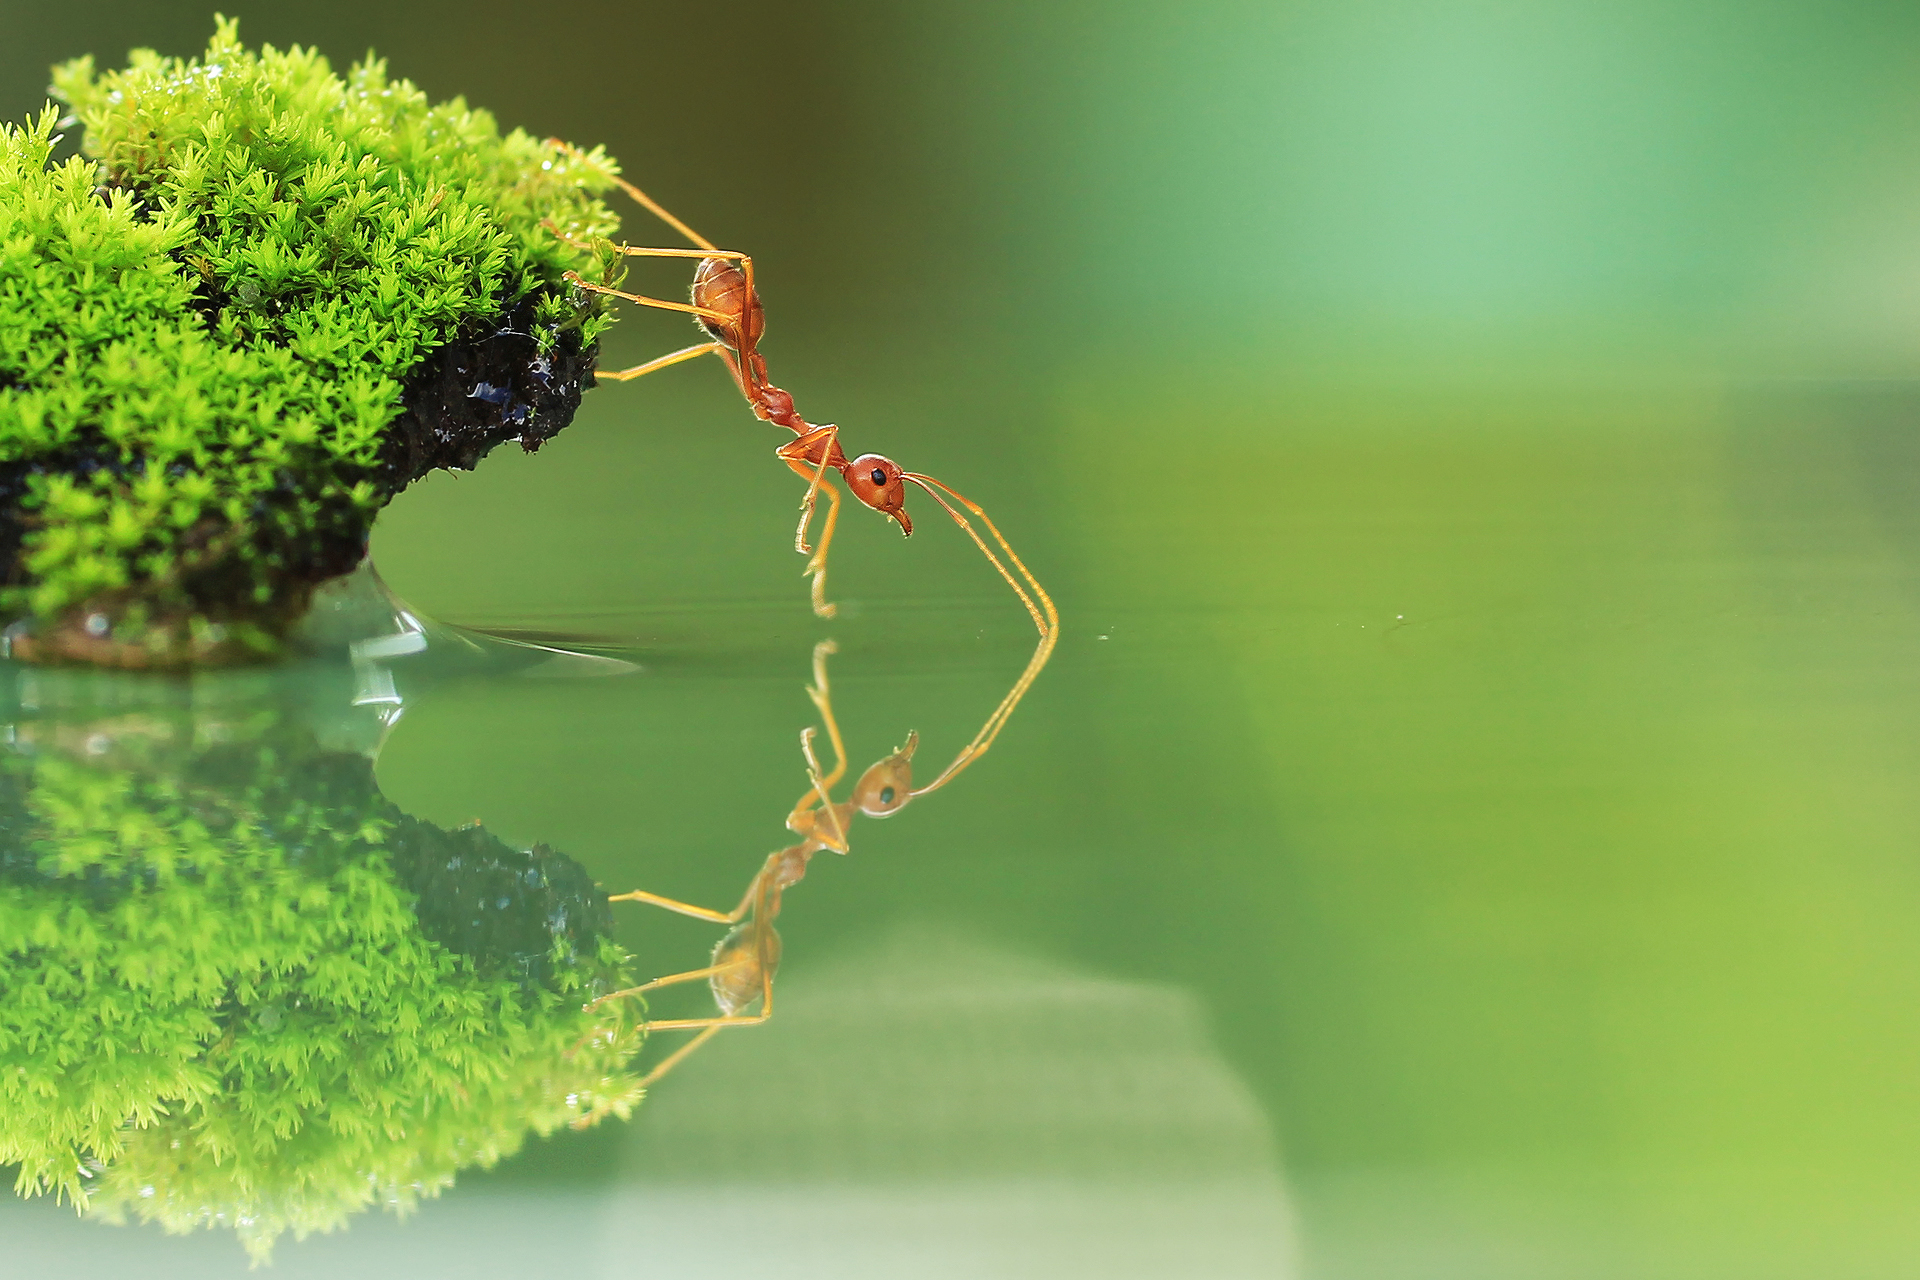 Animal Ant HD Wallpaper Background Image.